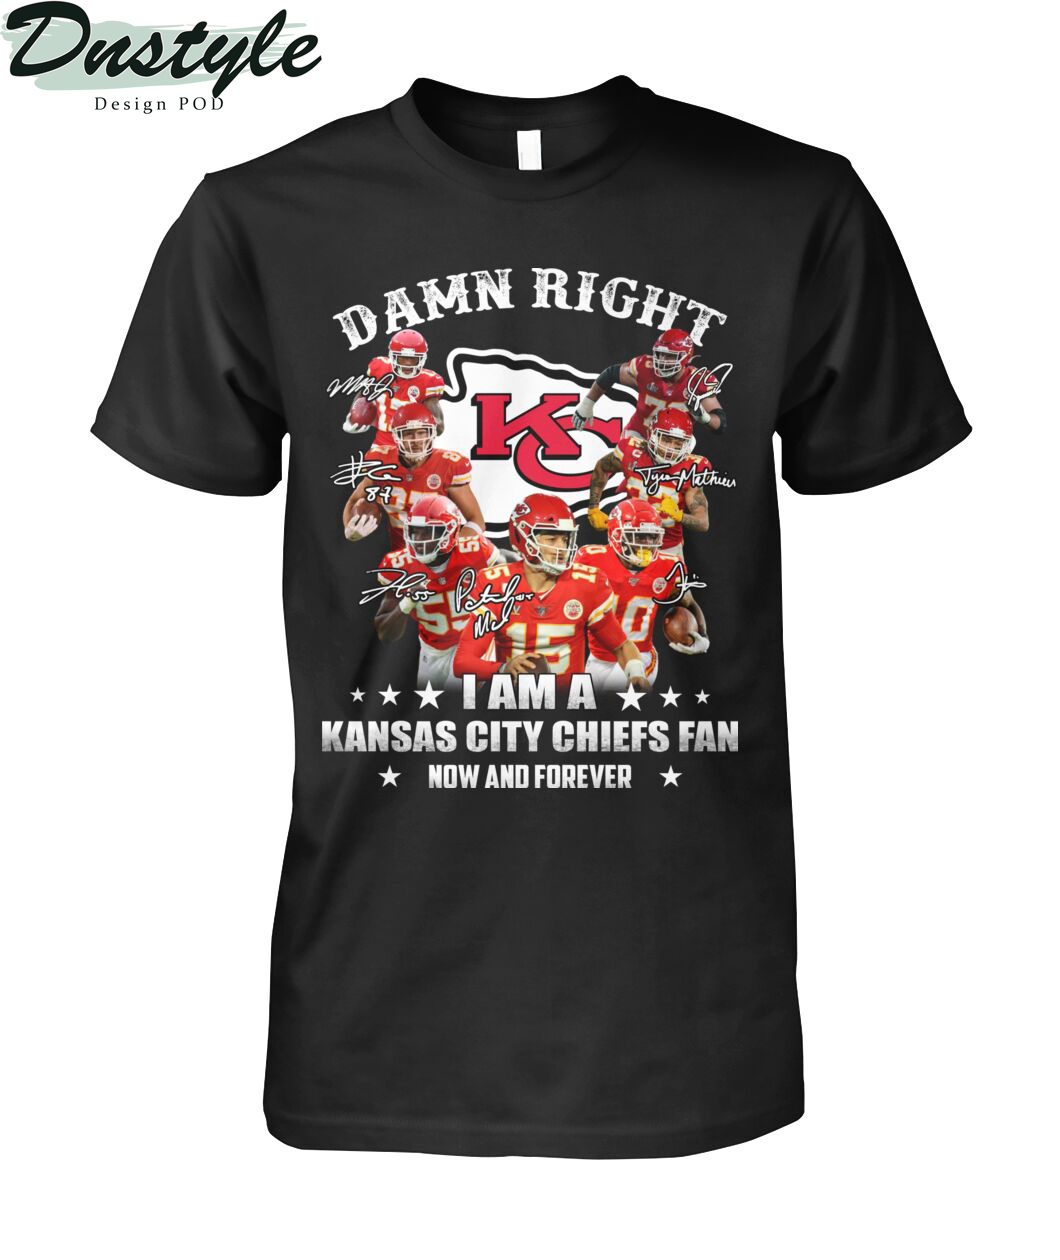 Damn right I am a Kansas city chiefs fan now and forever shirt